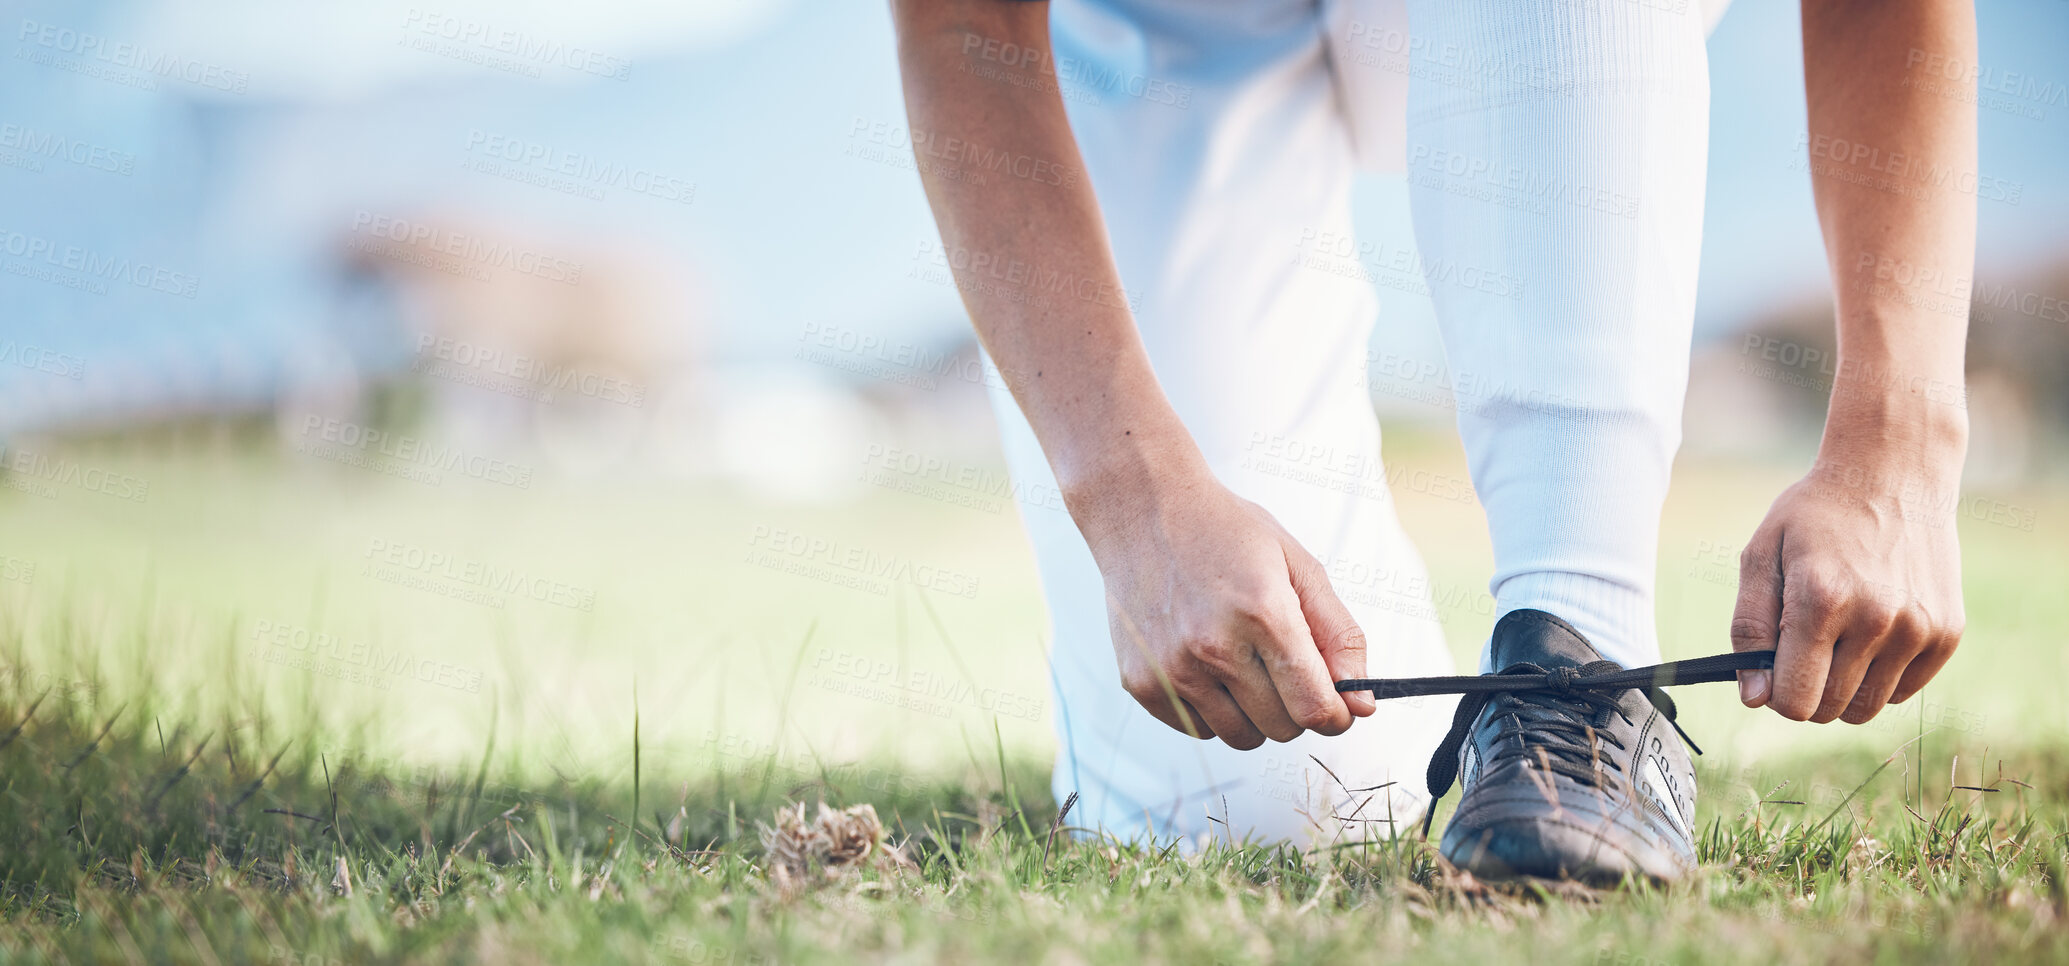 Buy stock photo Hands, feet and a sports person tying laces on a baseball field outdoor with mockup space for fitness. Exercise, shoes and getting ready with an athlete on a pitch for a match or training closeup